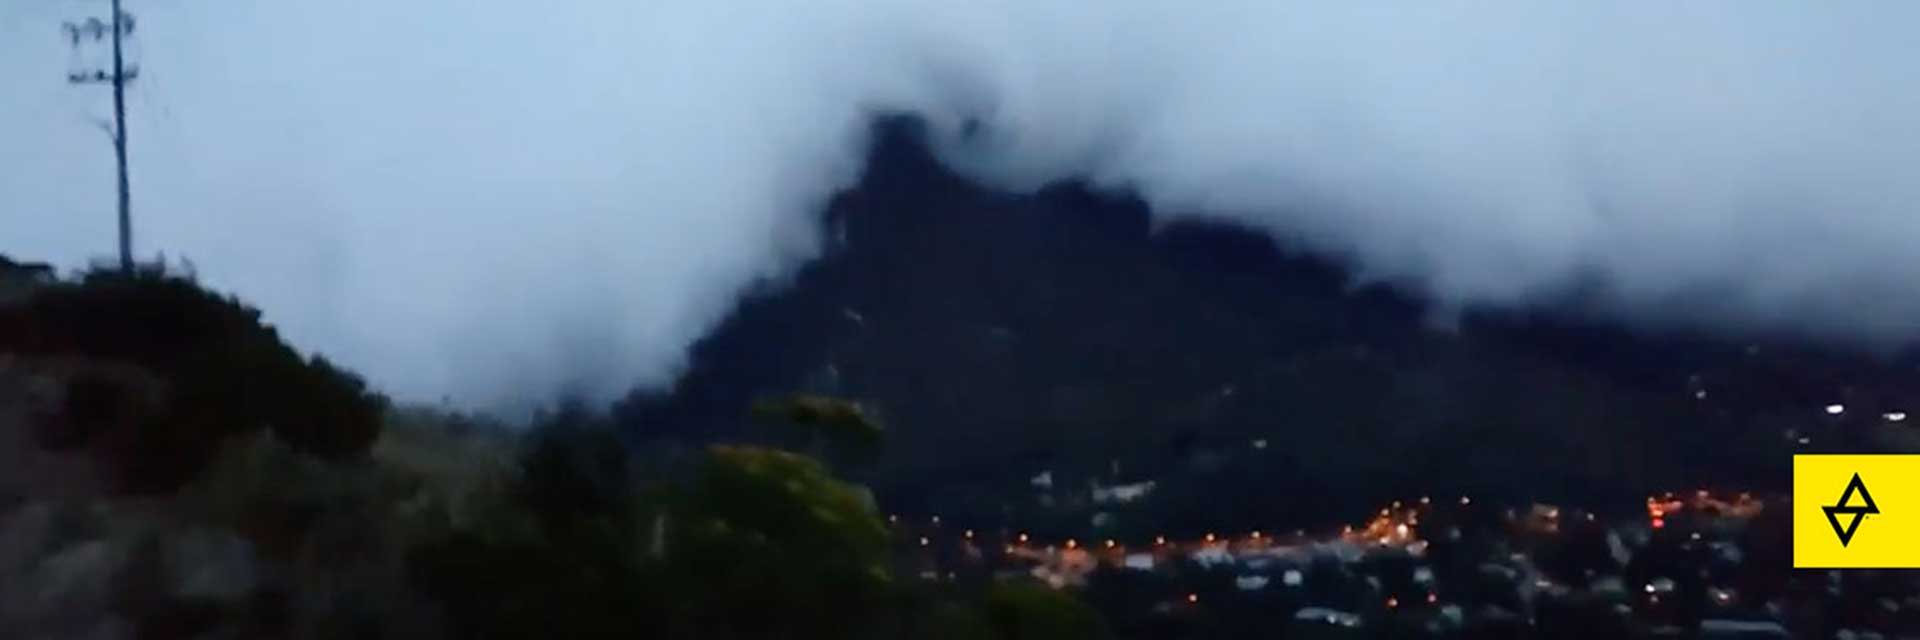 image of Lightning on the mountain